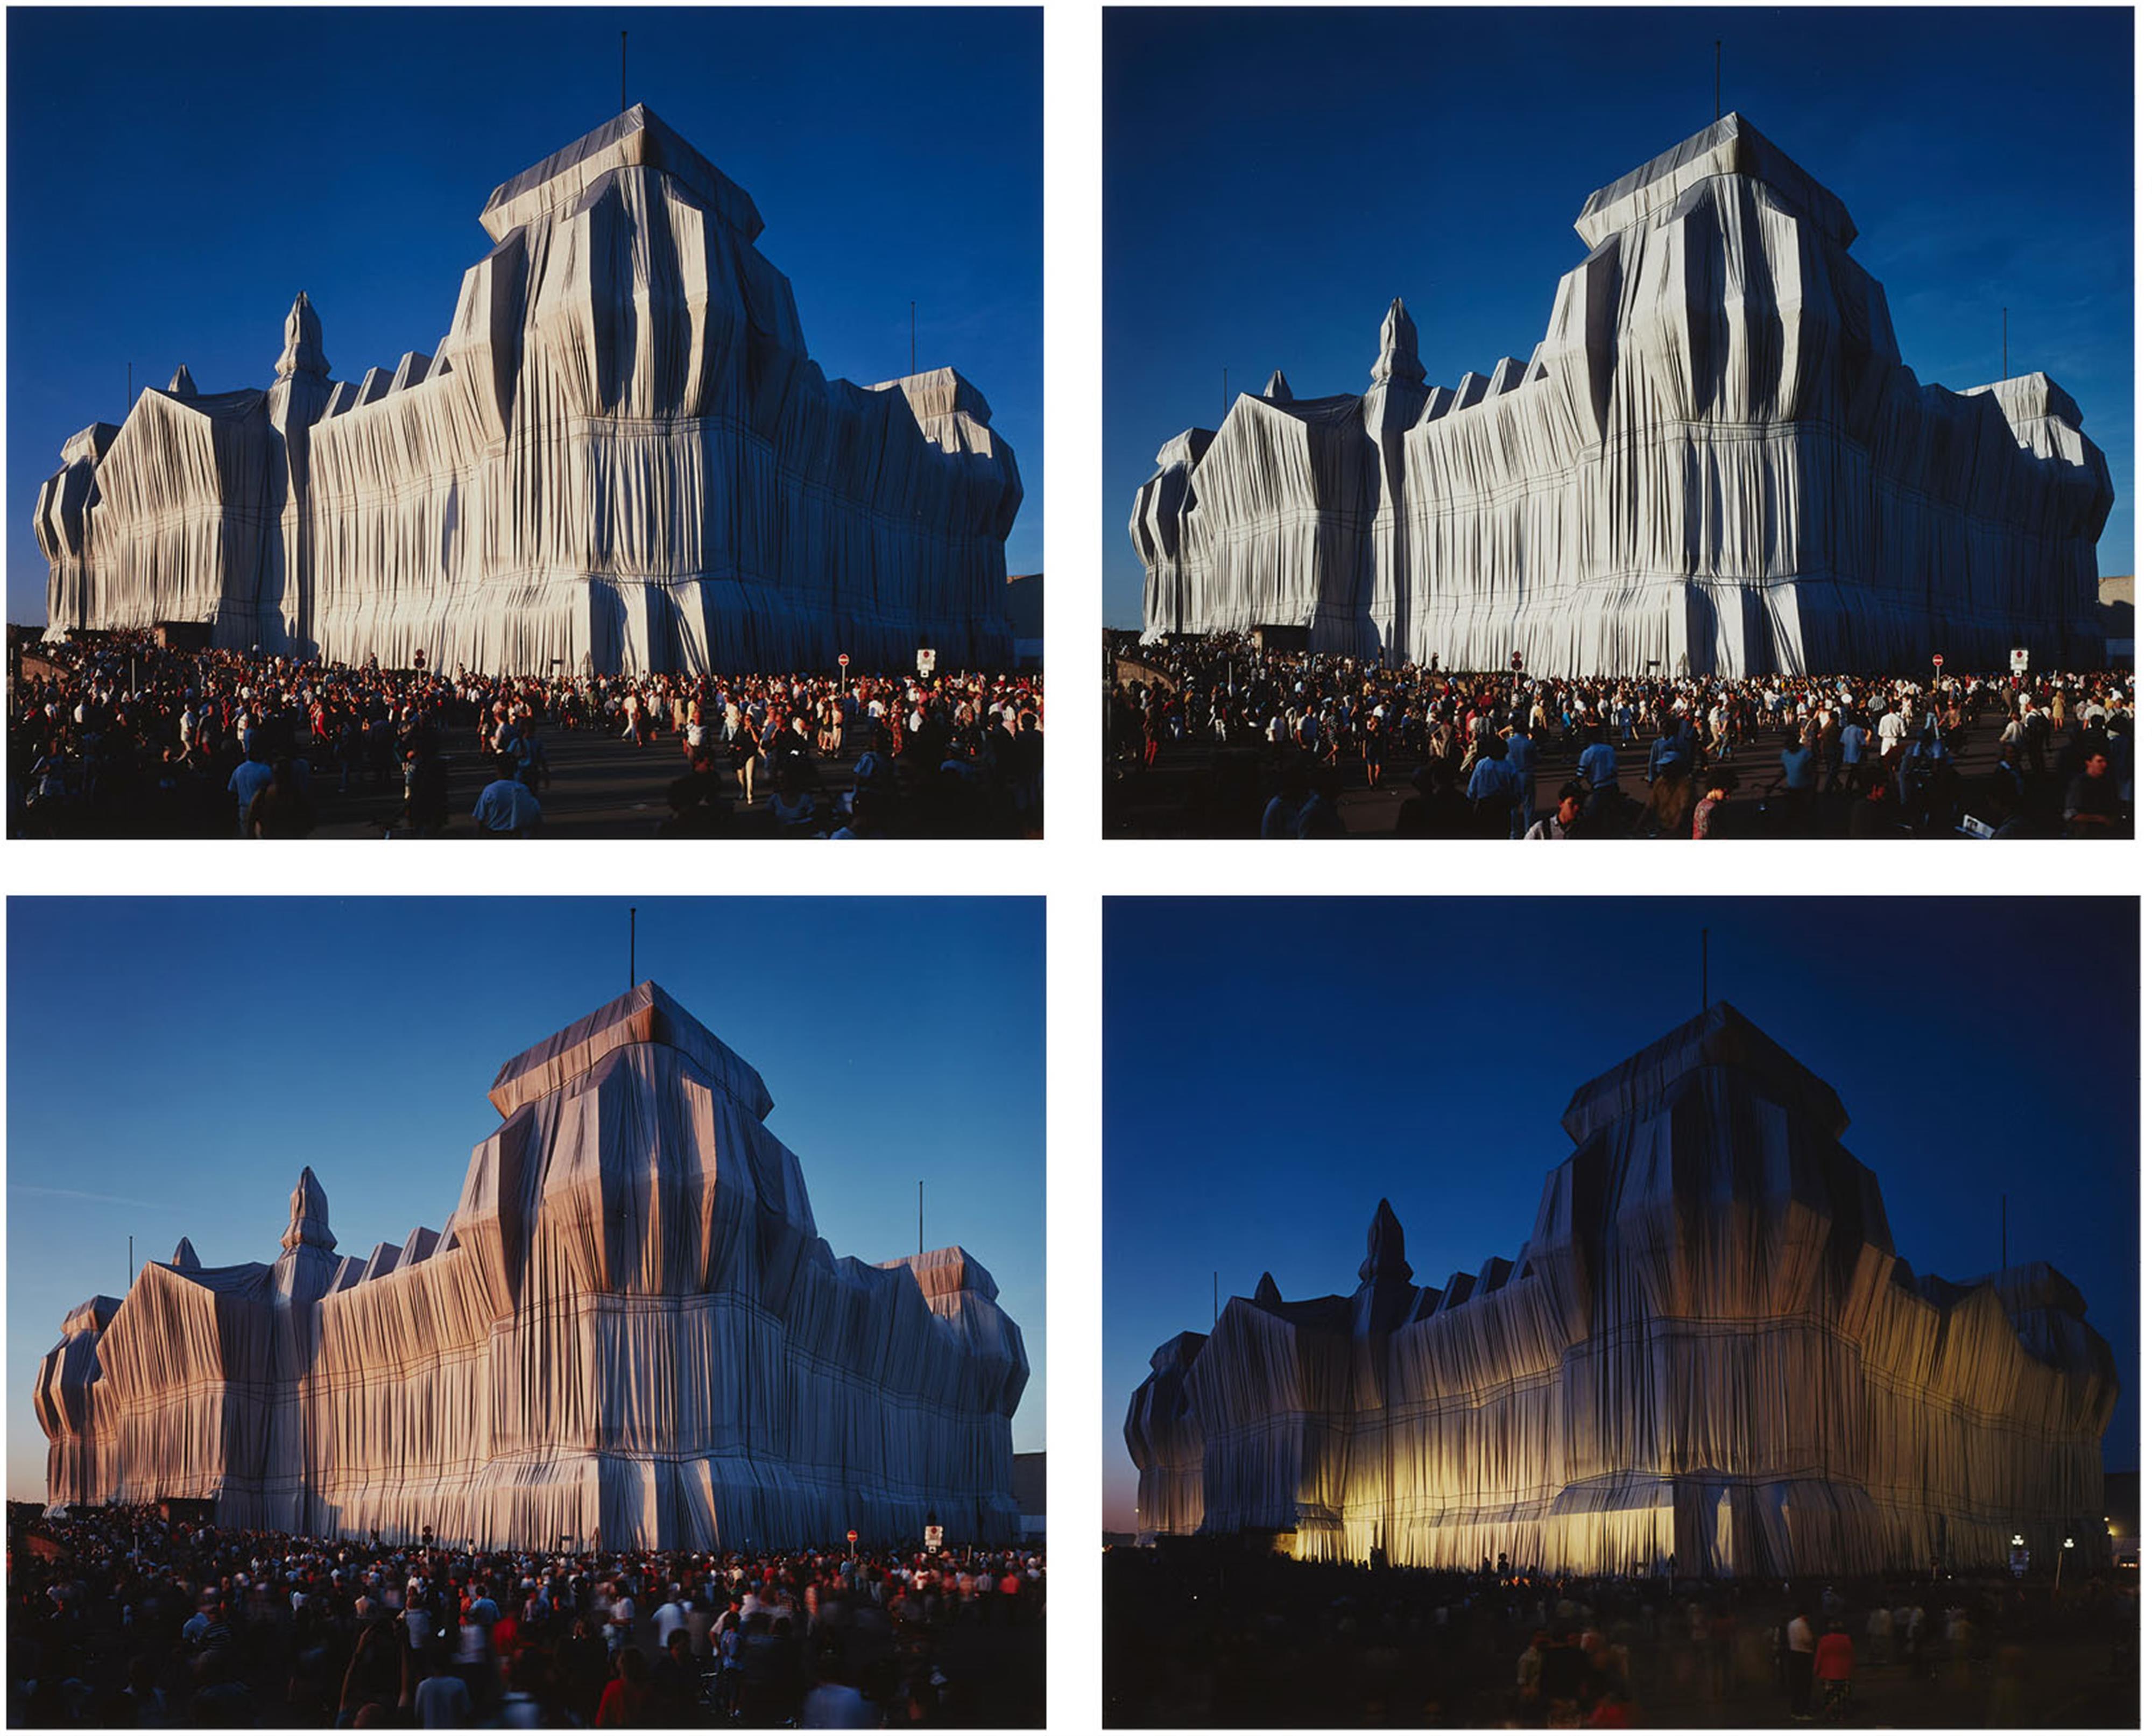 Christo & Jeanne Claude
Wolfgang Volz - Wrapped Reichstag Berlin - image-1